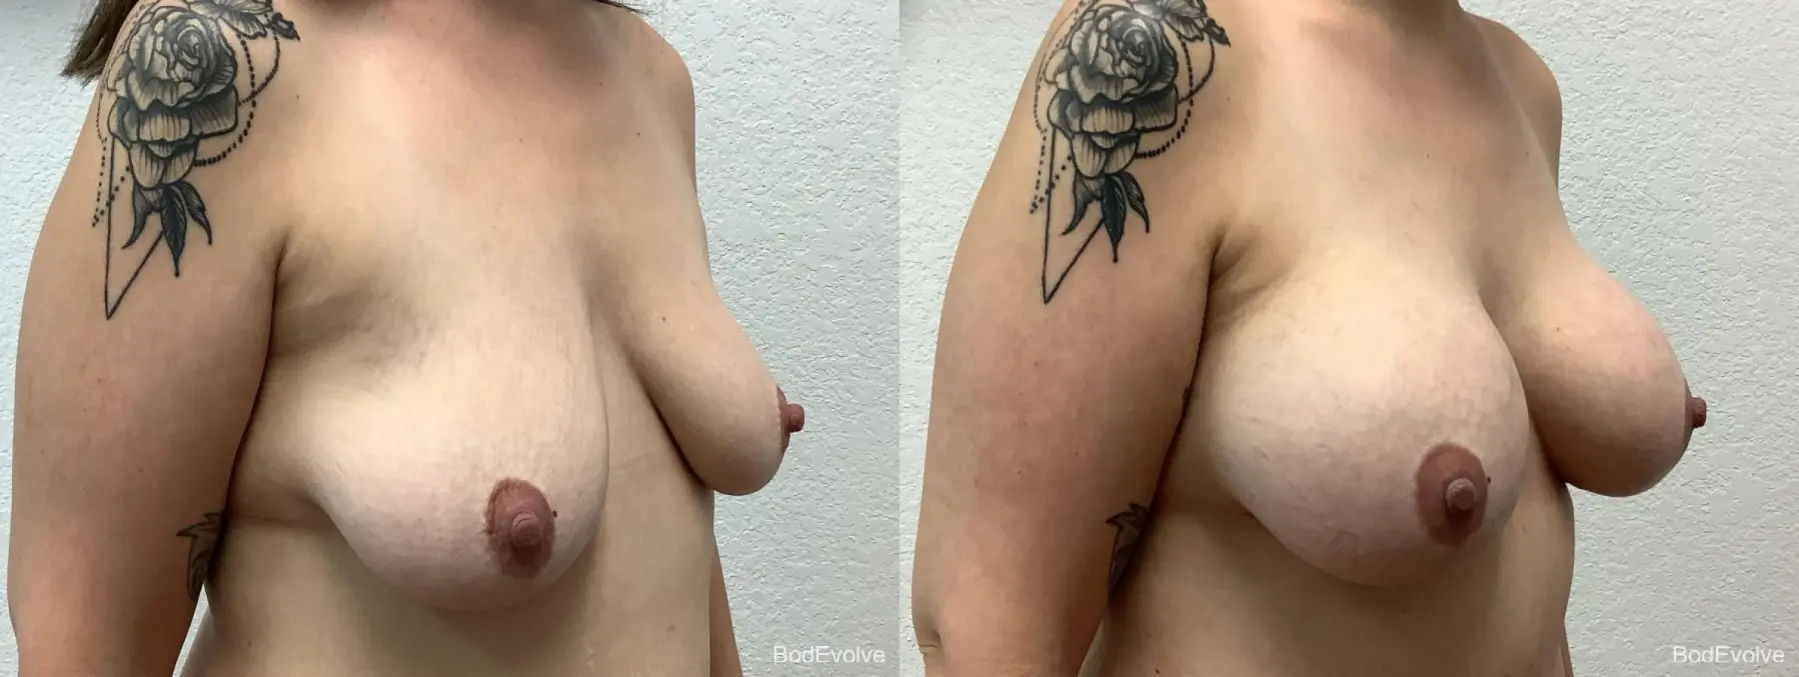 Breast Augmentation: Patient 8 - Before and After 4